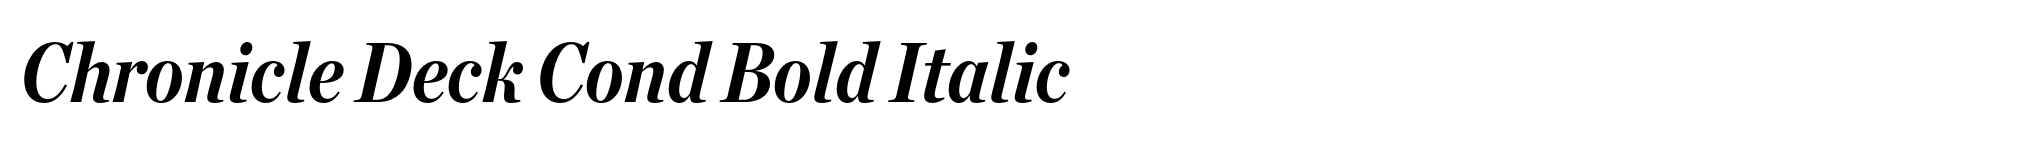 Chronicle Deck Cond Bold Italic image